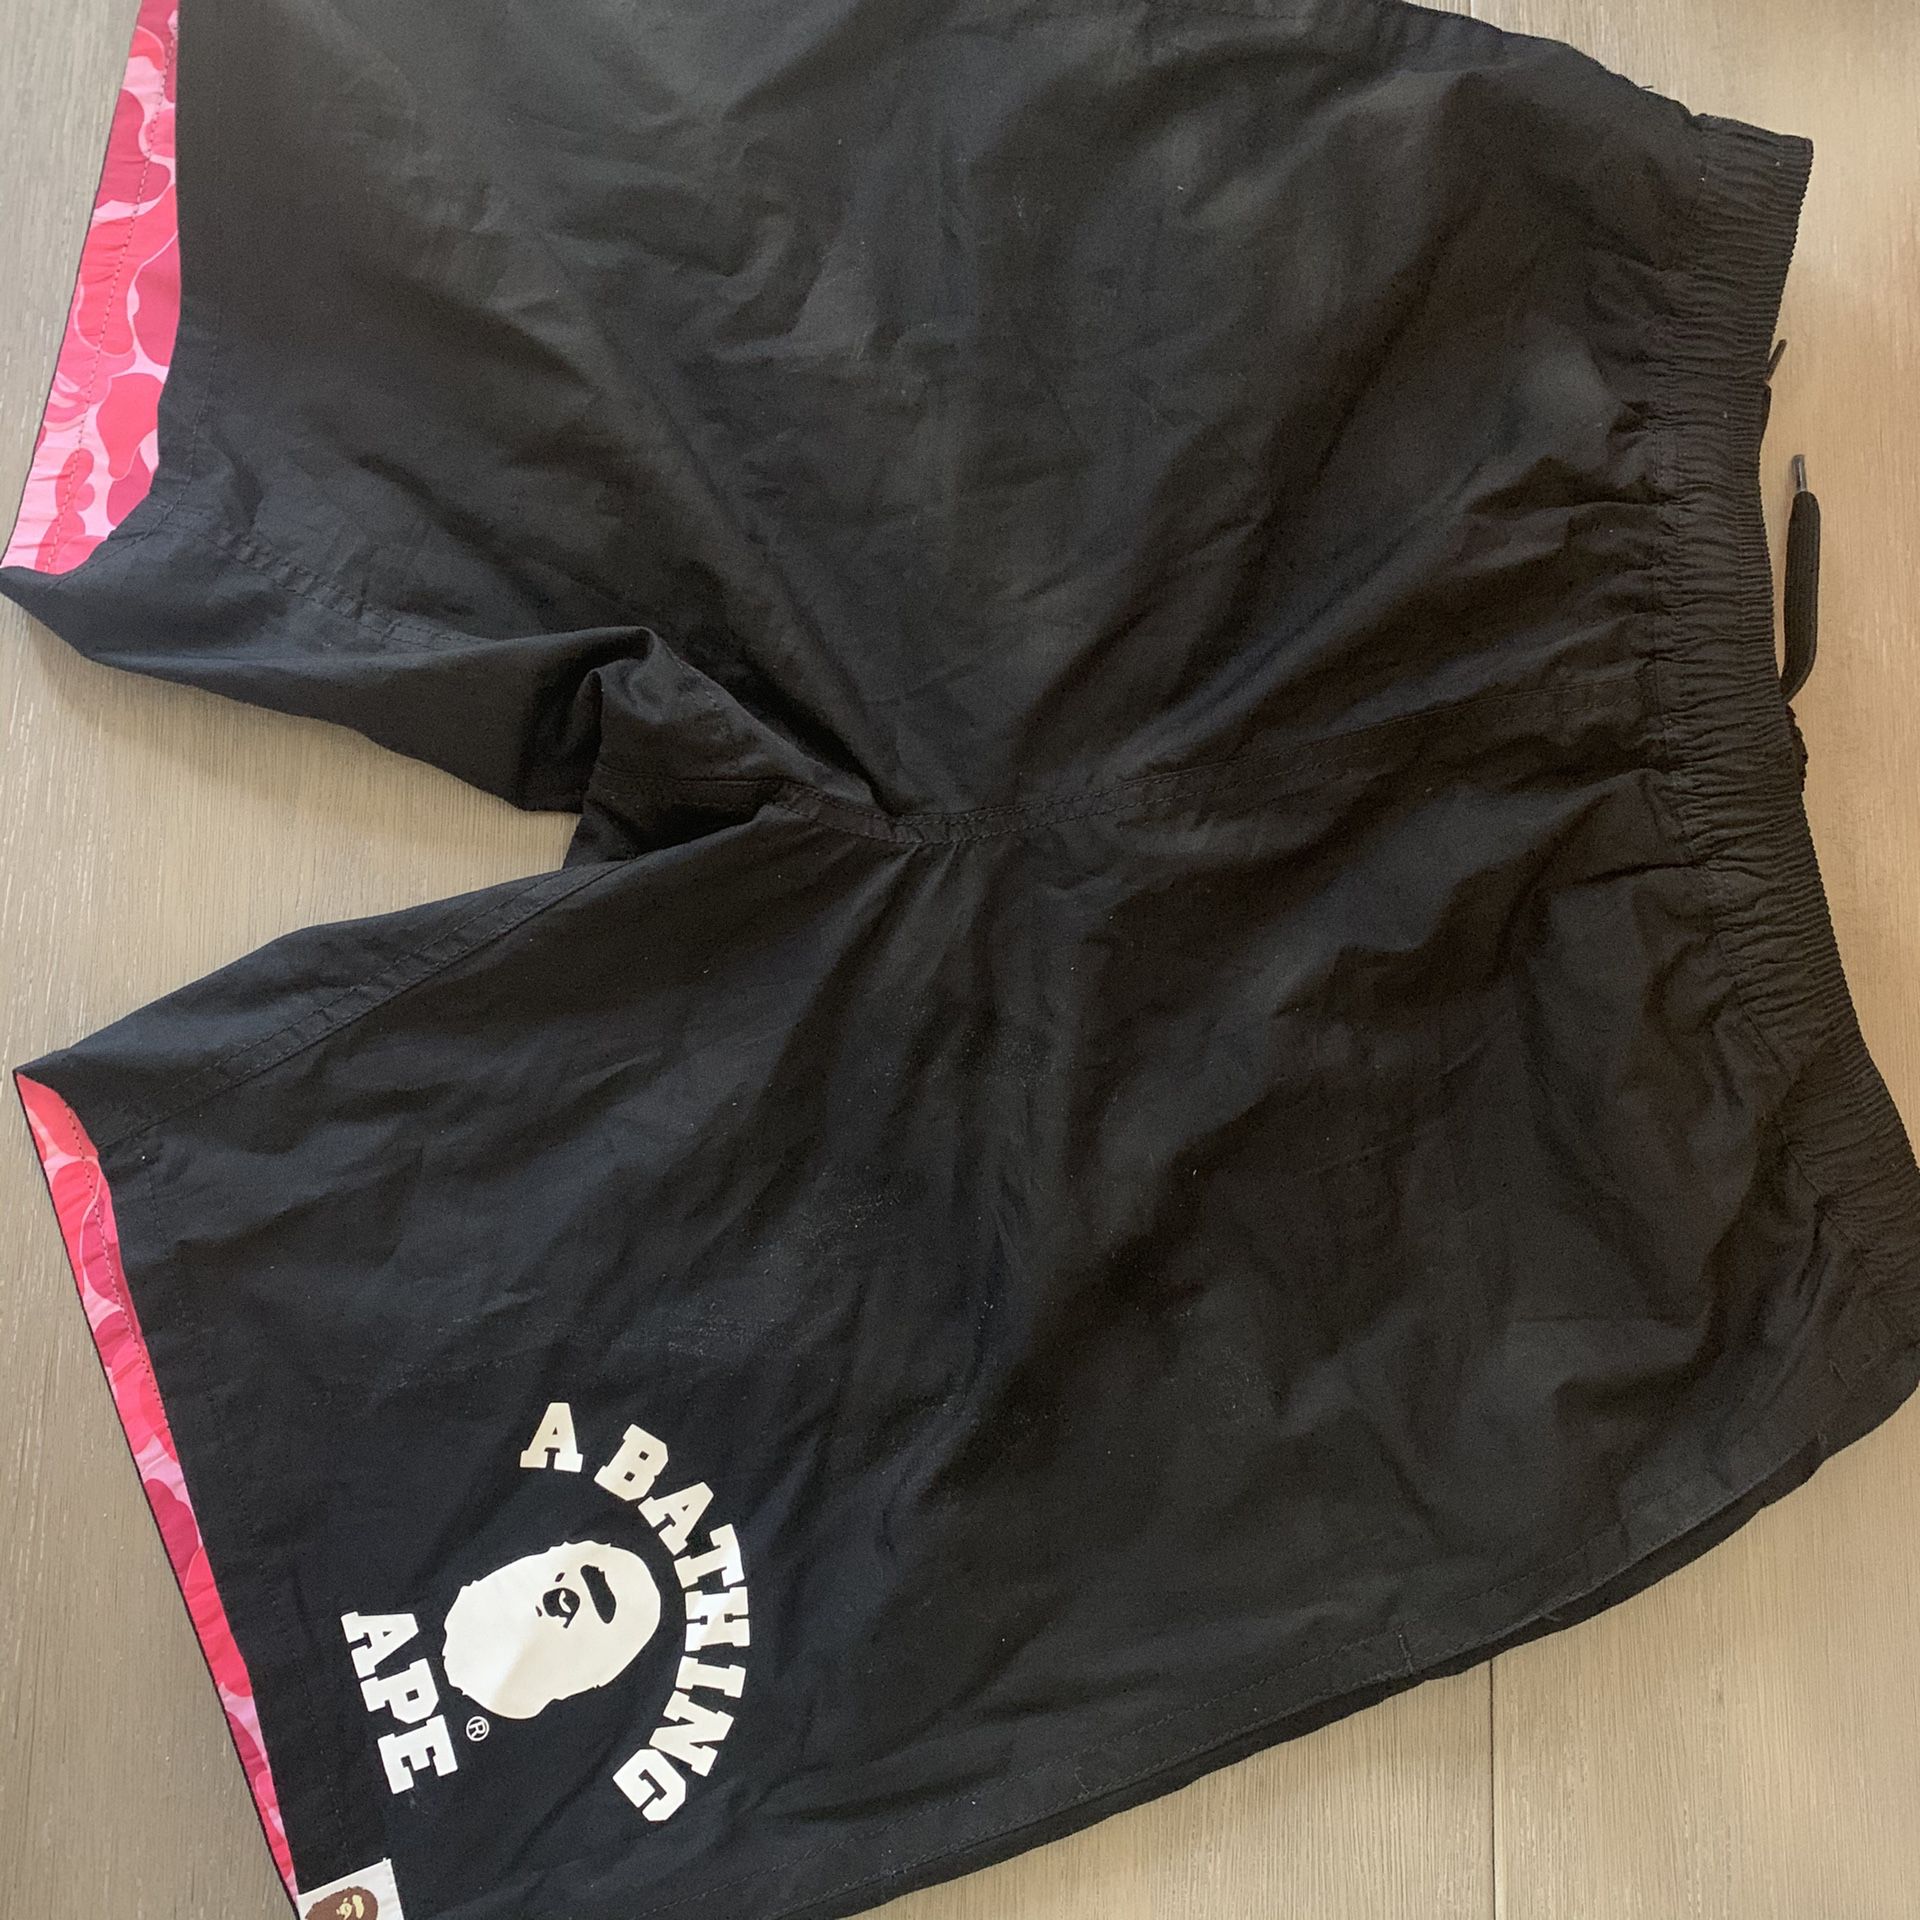 reversible bape shorts very rare sold out online